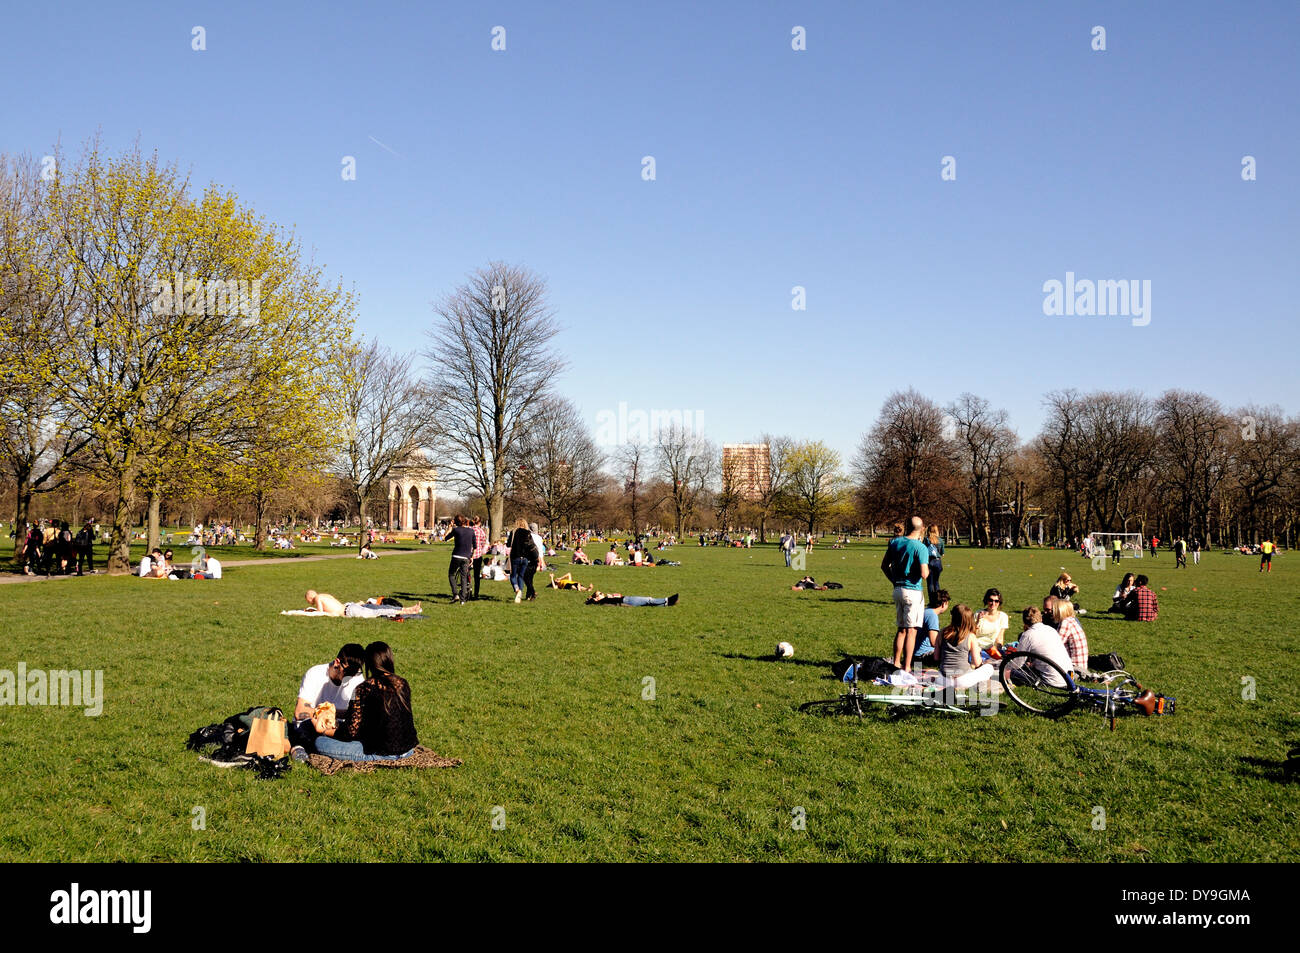 People sitting on the grass Victoria Park, London Borough of Tower Hamlets, England Britain UK Stock Photo